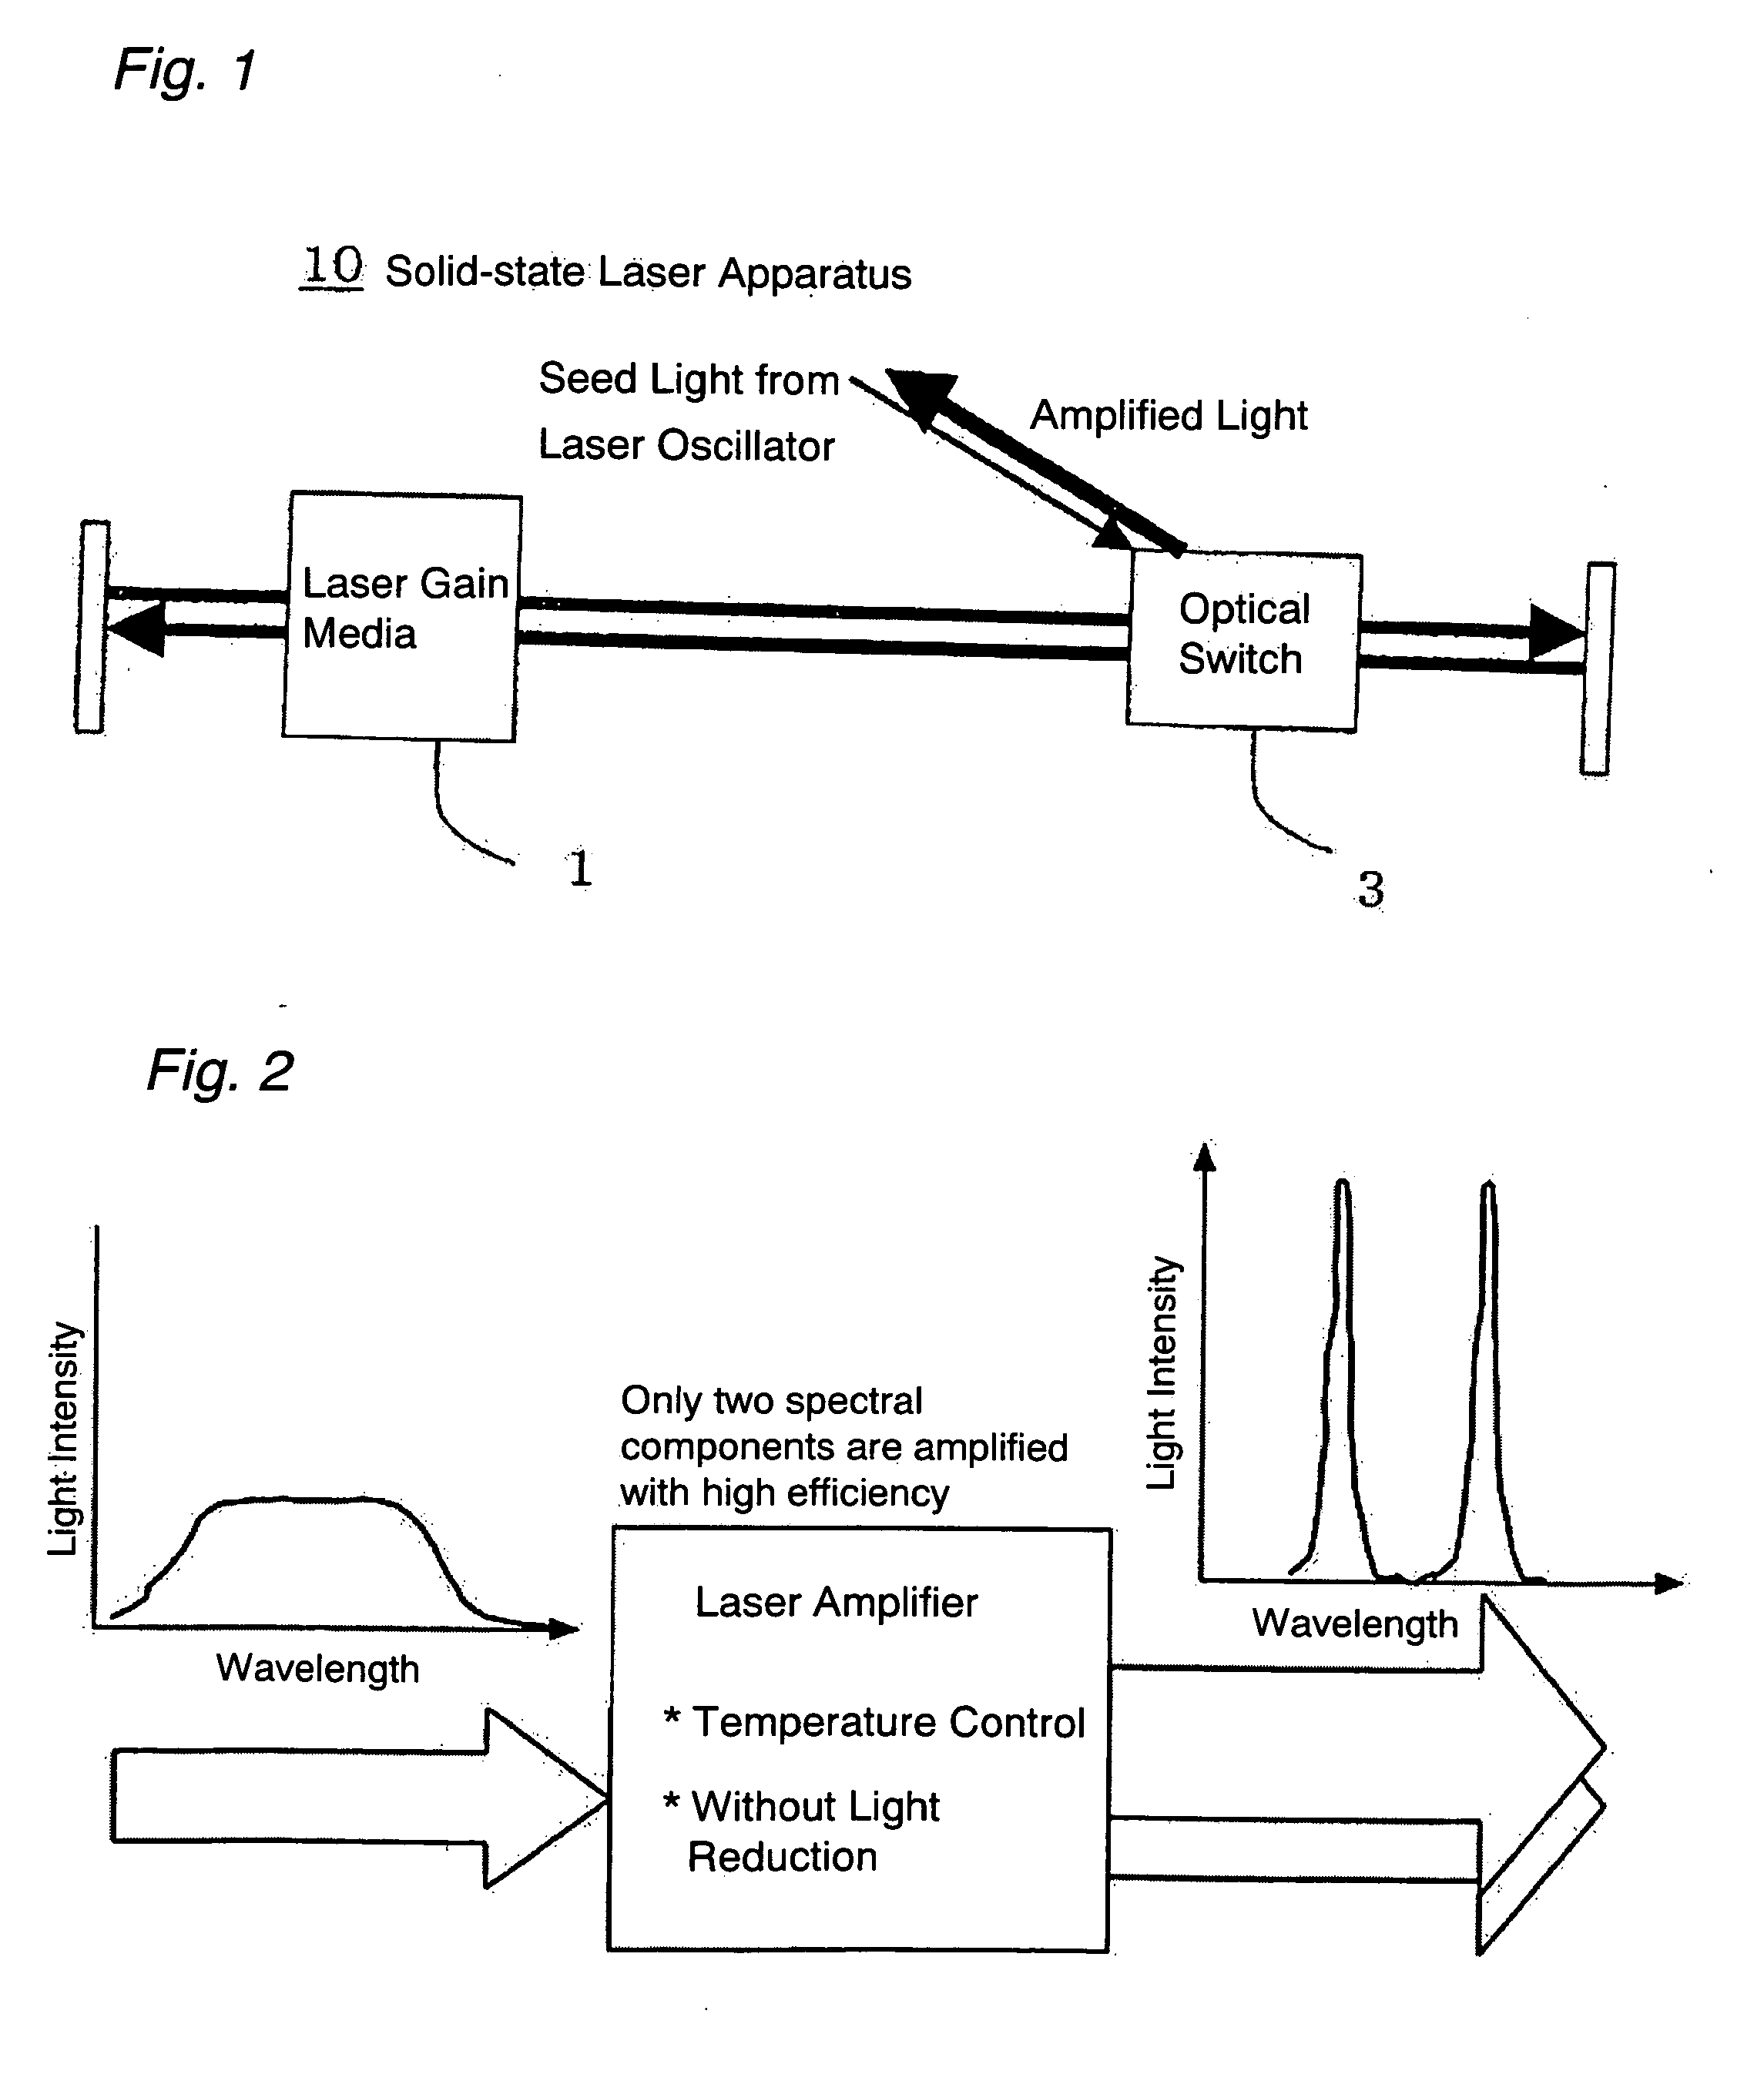 Solid-state laser apparatus